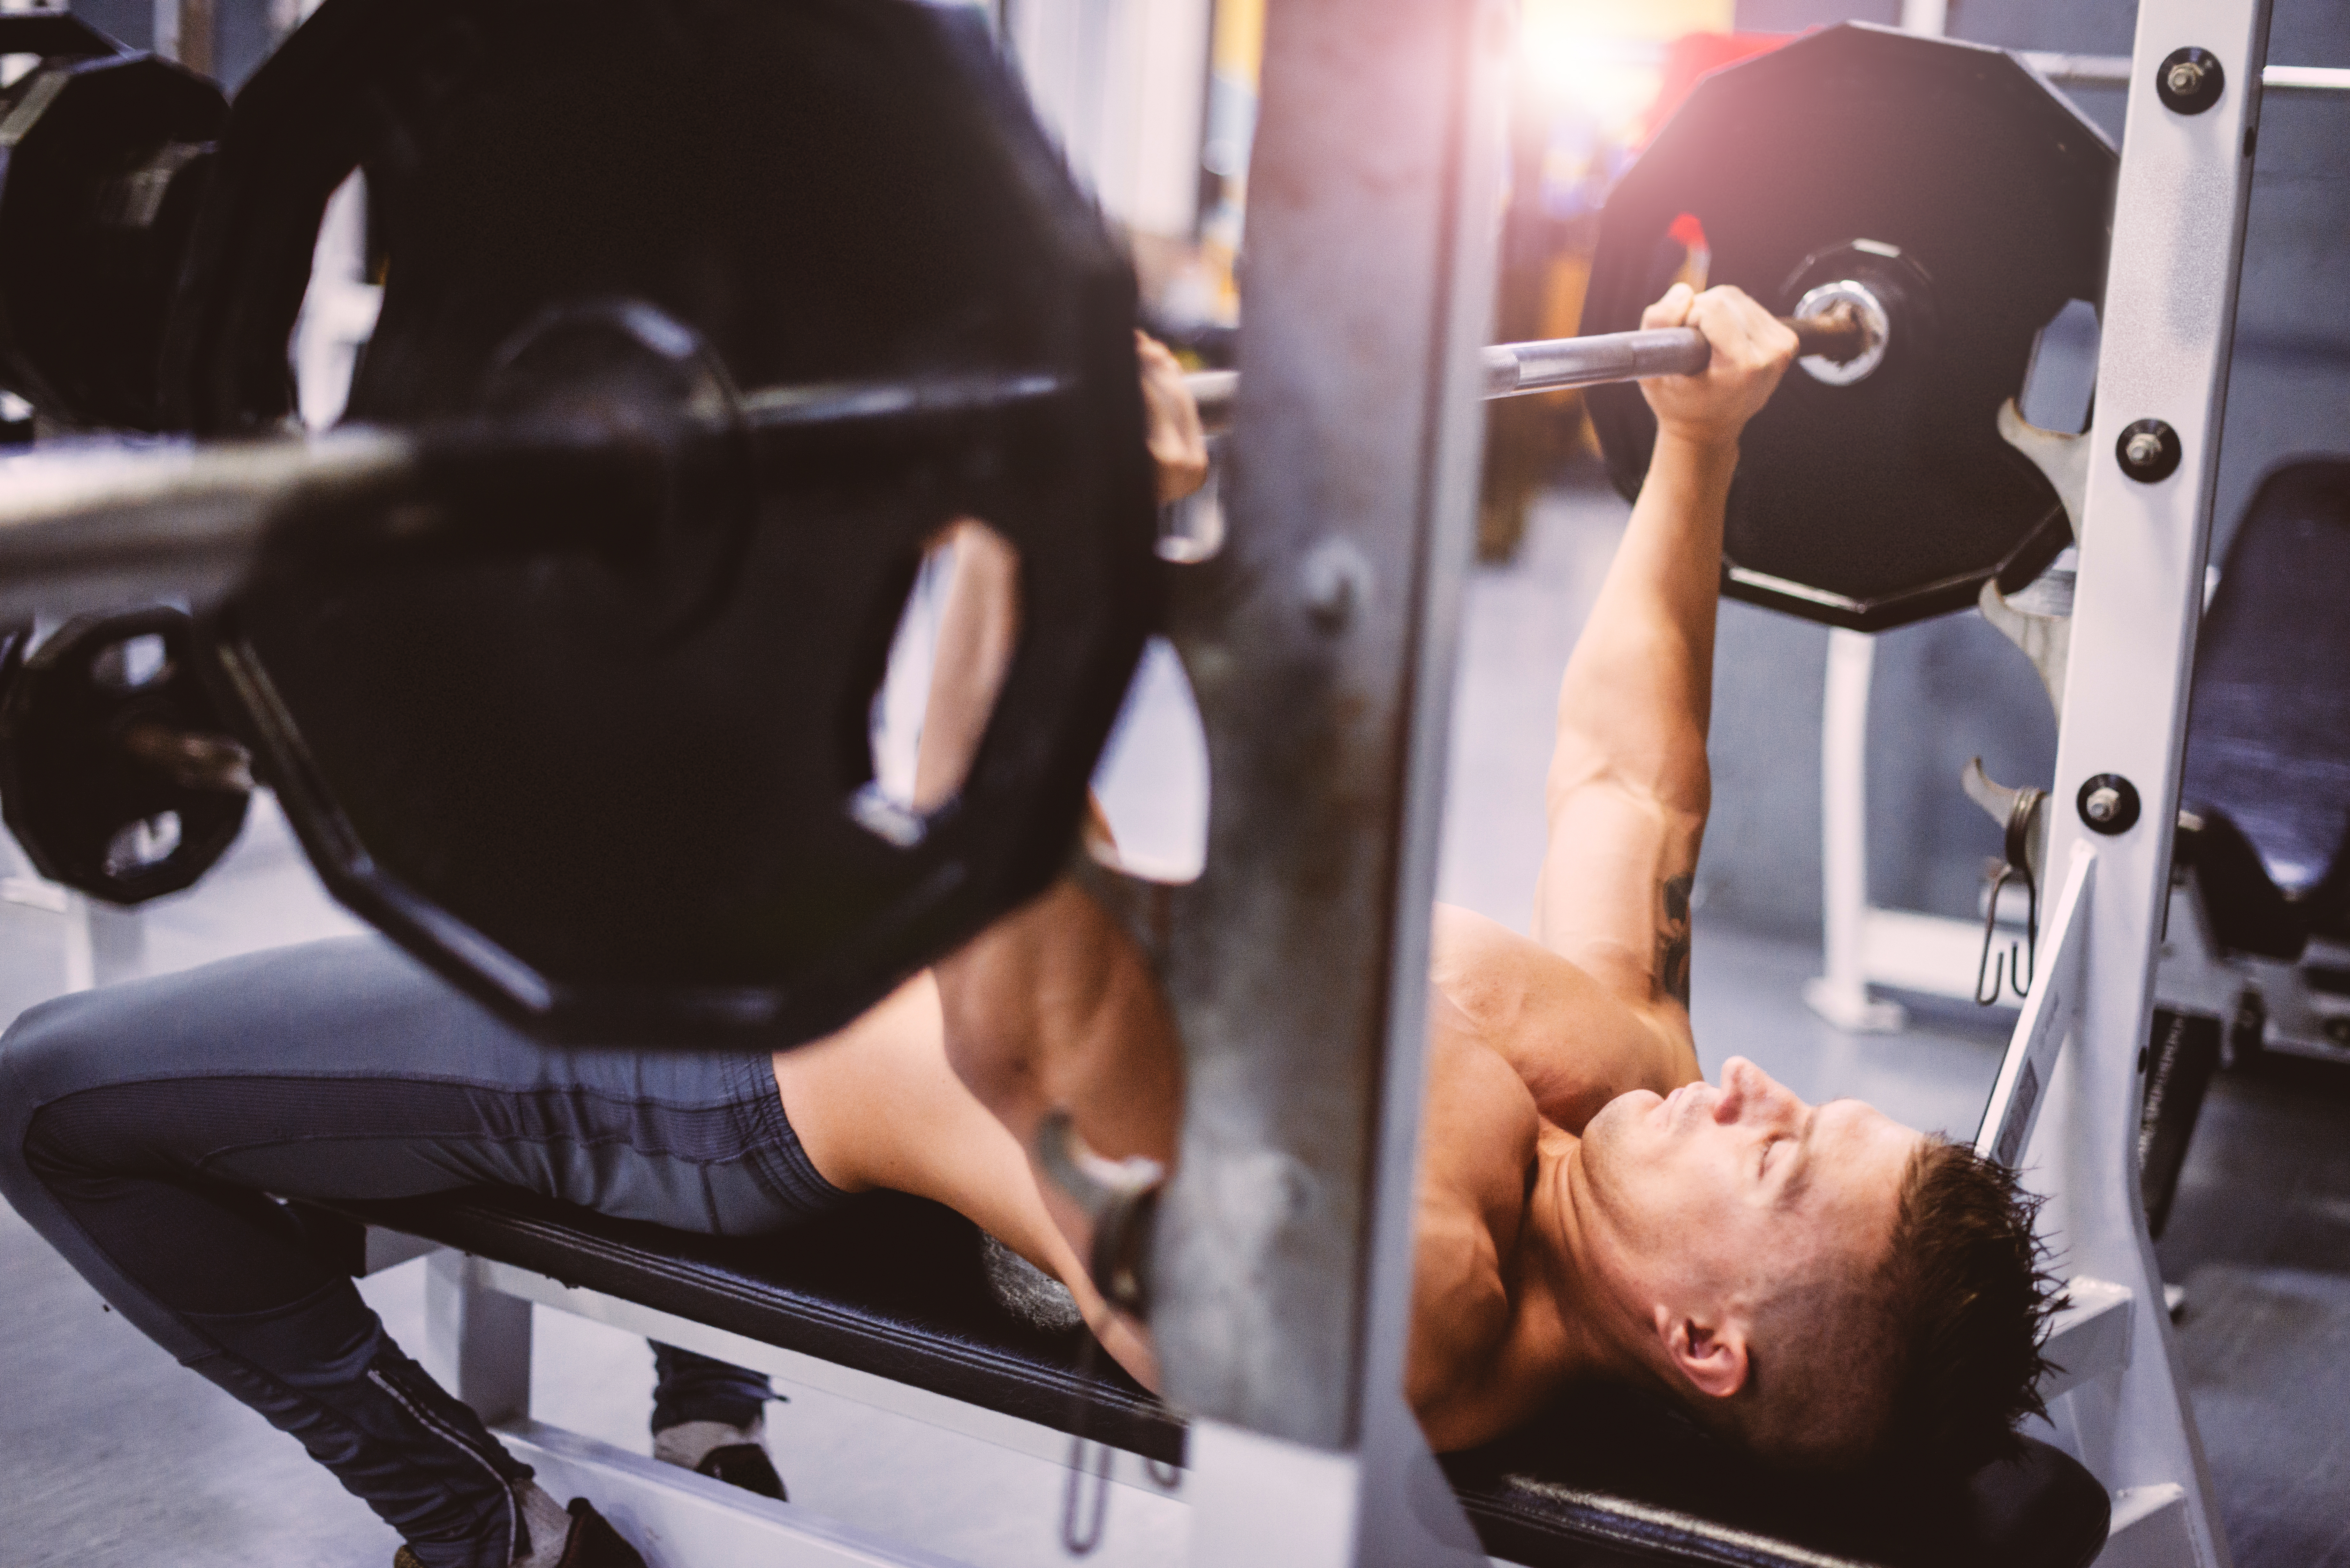 Ten stone lifter bench presses 165 kilos, other gym users lo